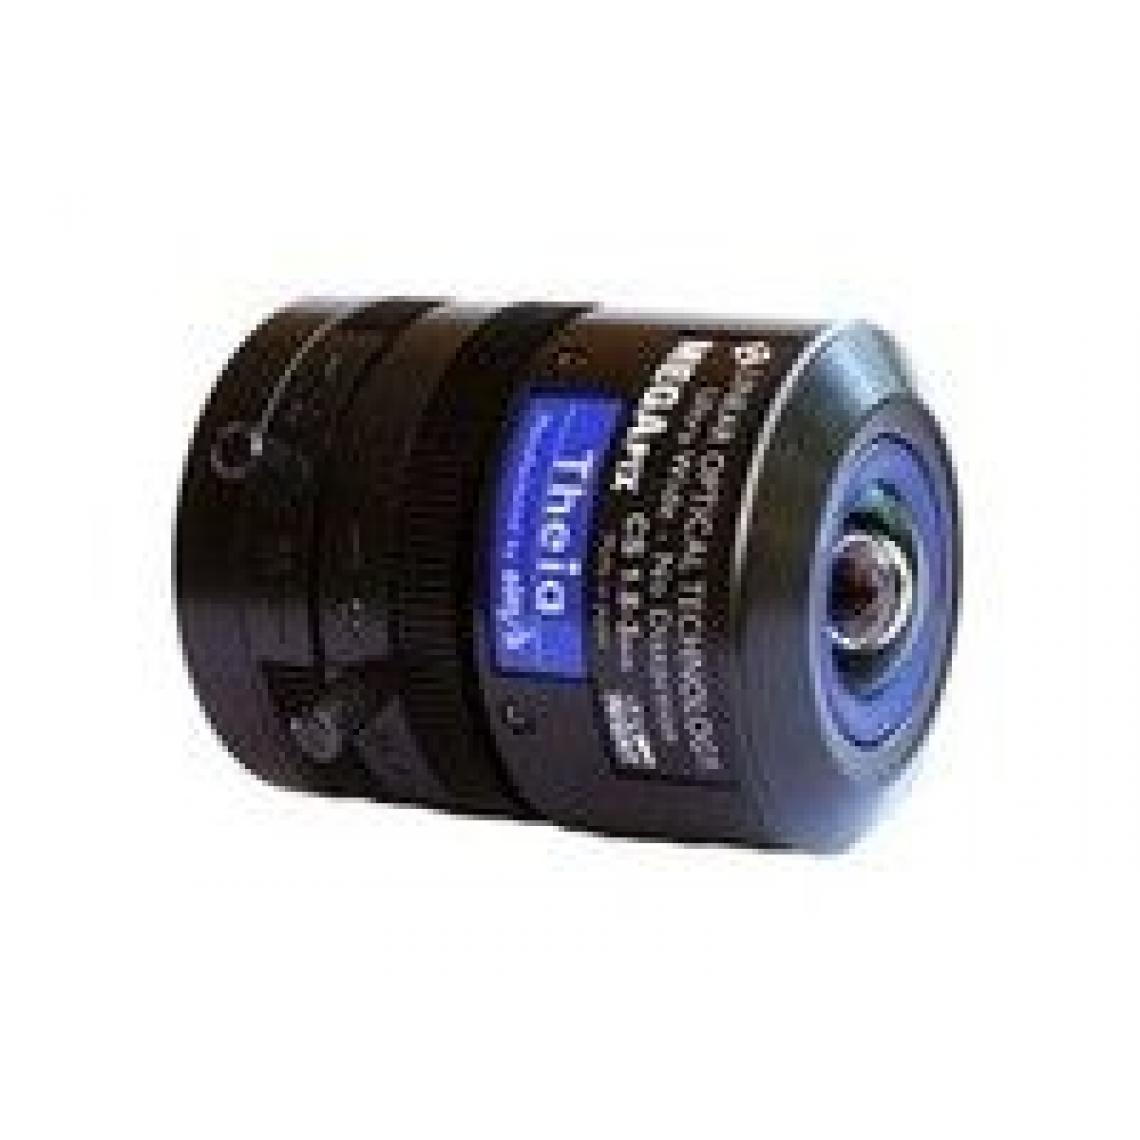 Arte Video - Axis Theia Varifocal Ultra Wide Lens - Objectif Photo